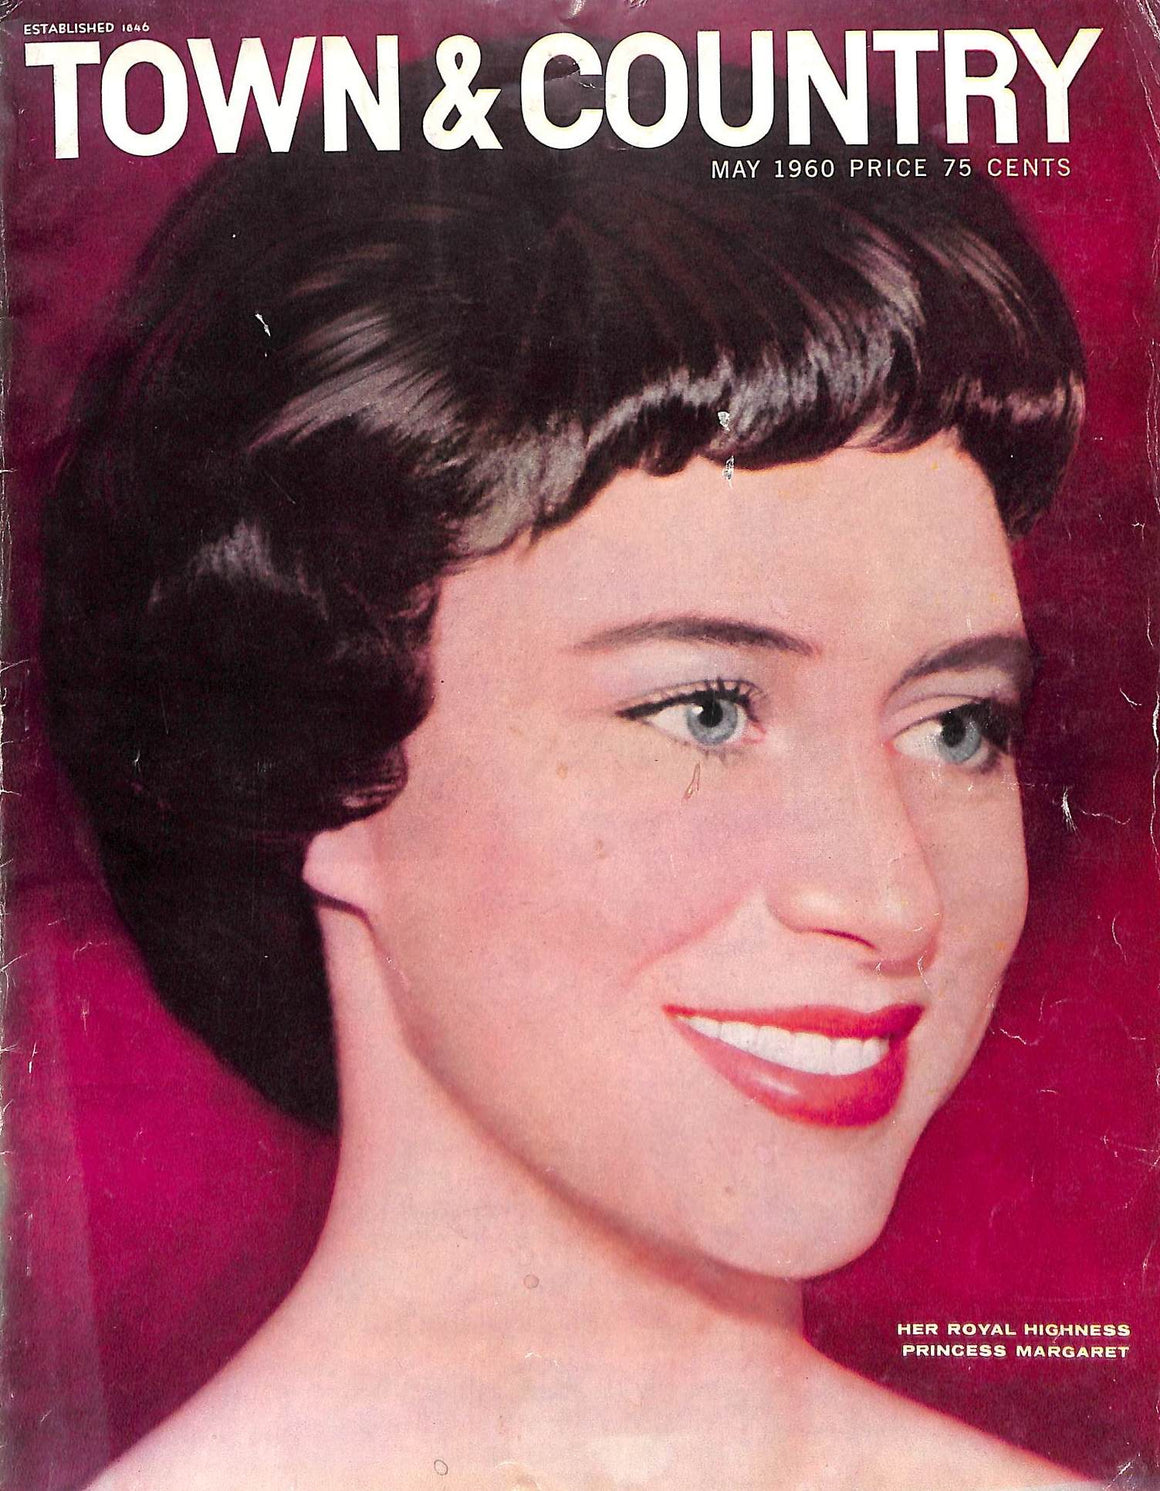 "Town & Country May 1960 w/ HRH Princess Margaret Cover"